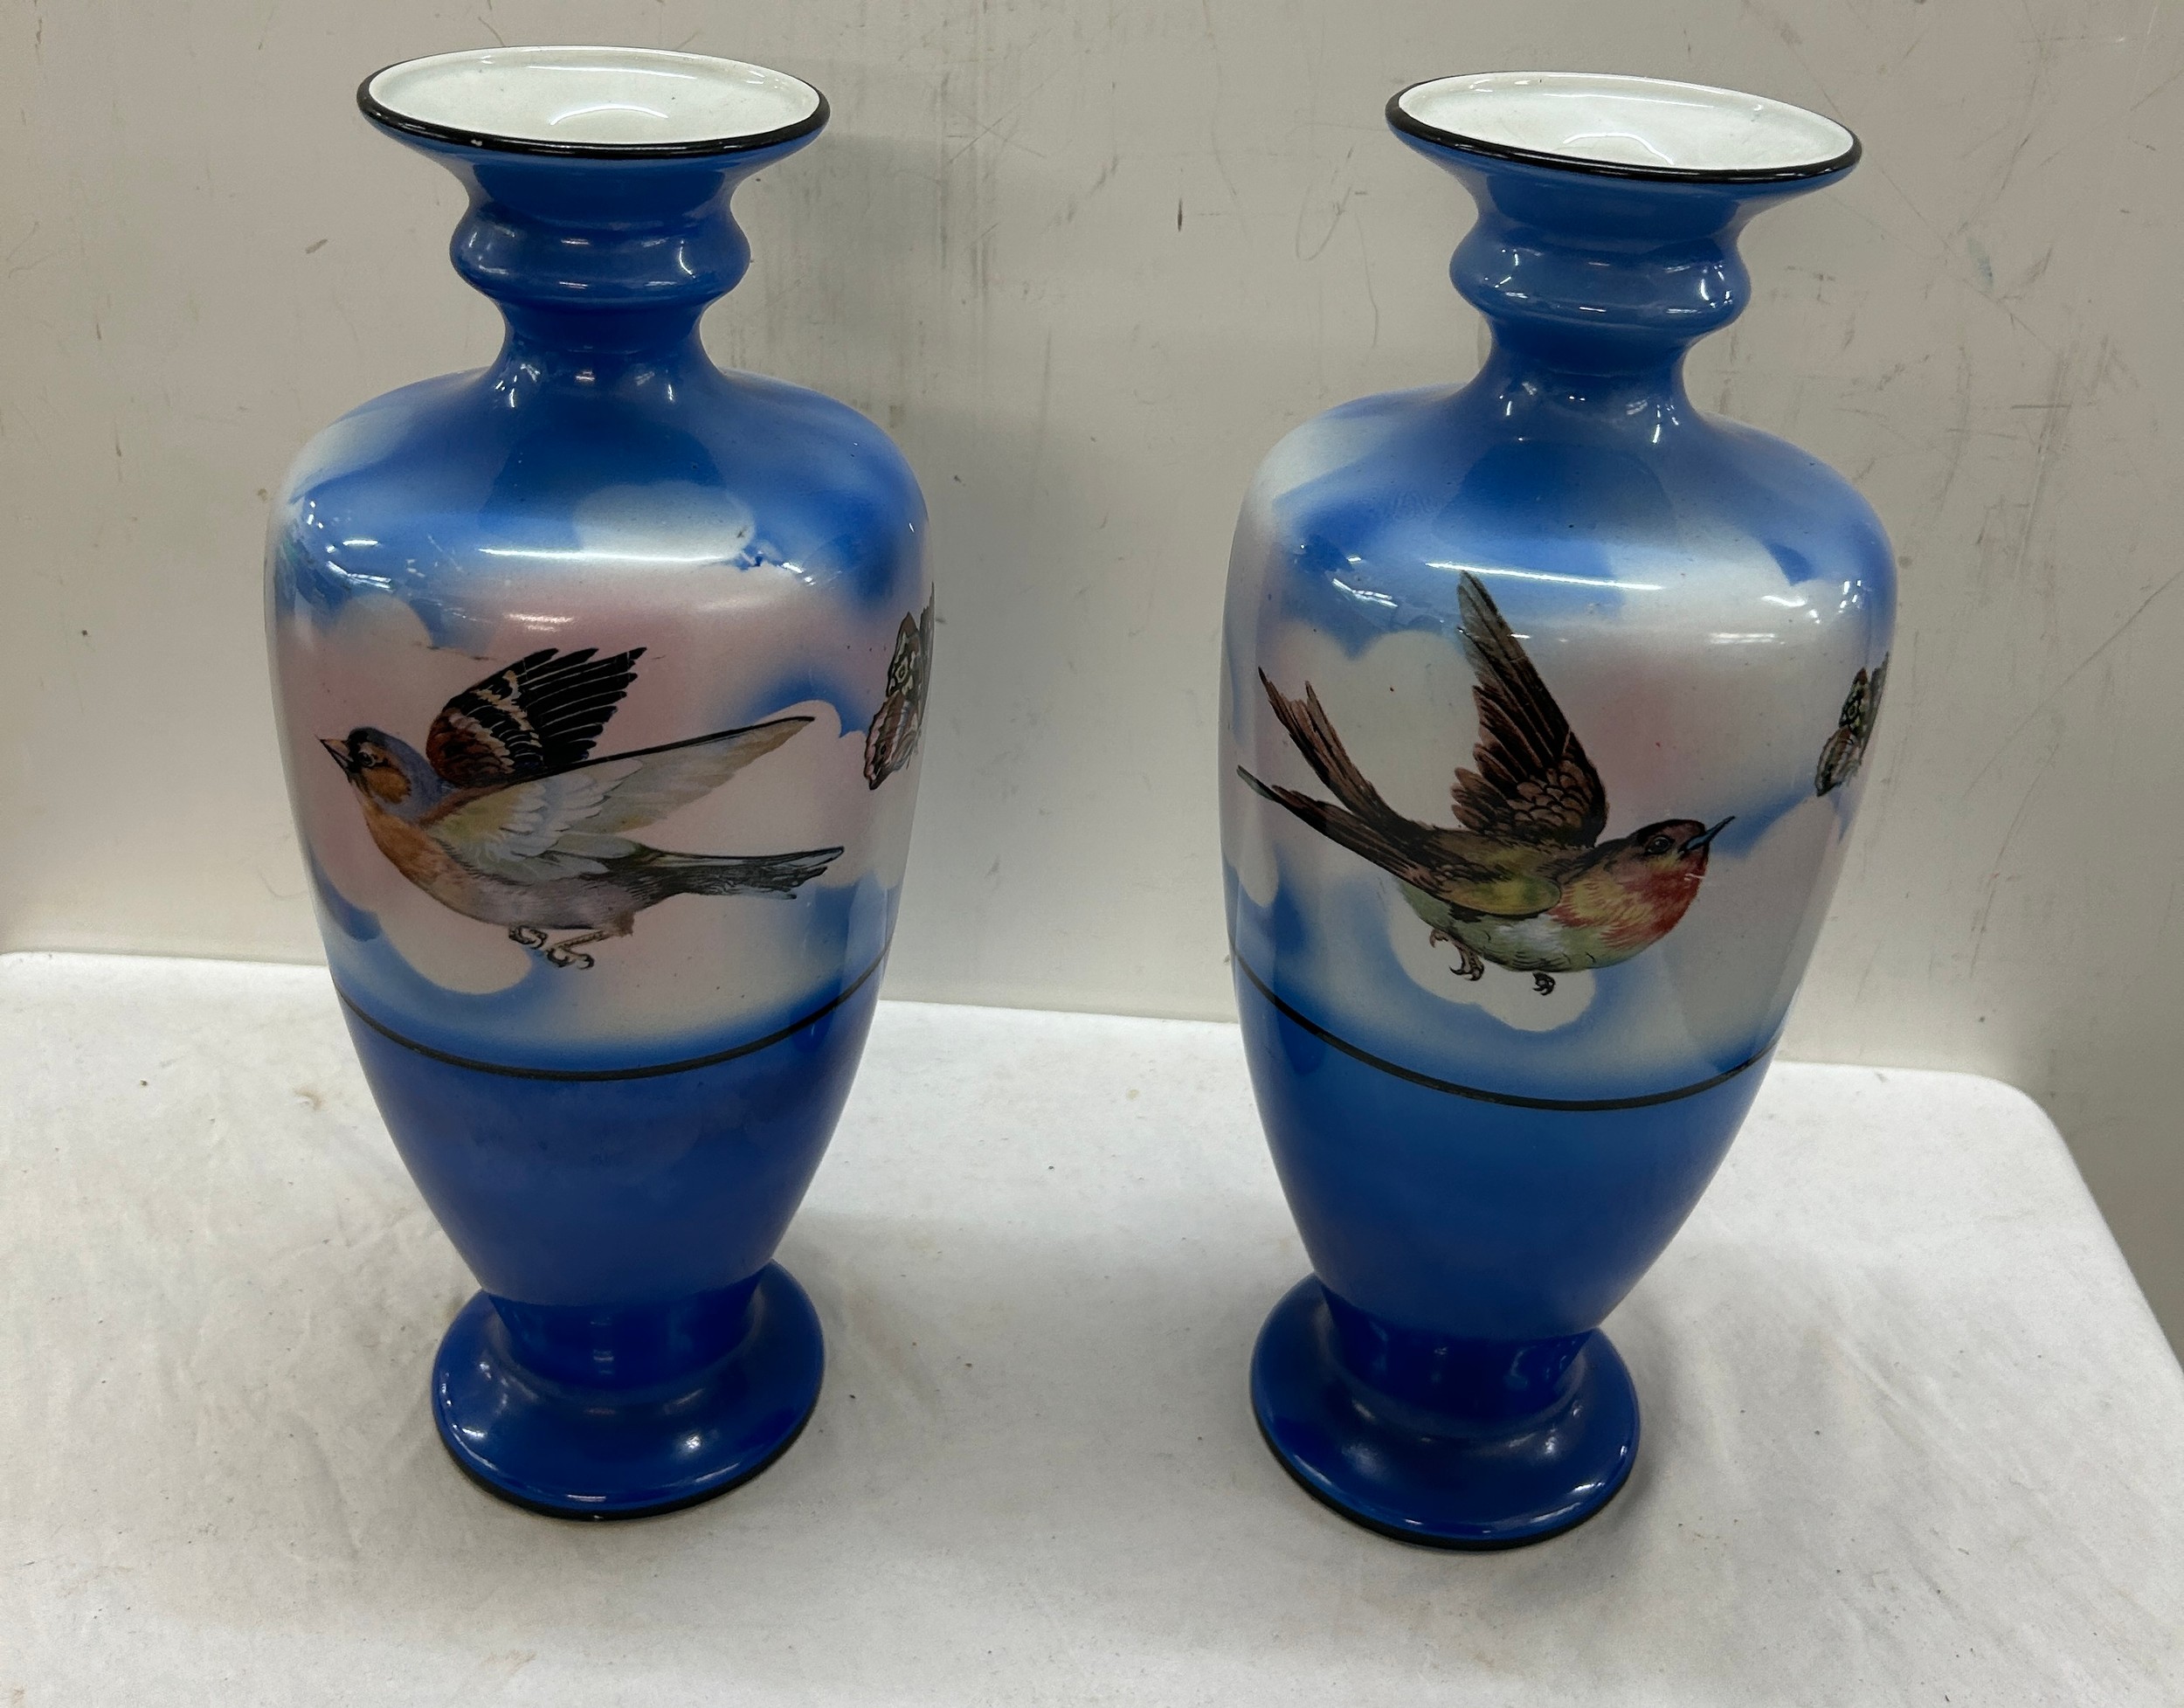 Pair of bird scene vases, height 13 inches tall - Image 2 of 3